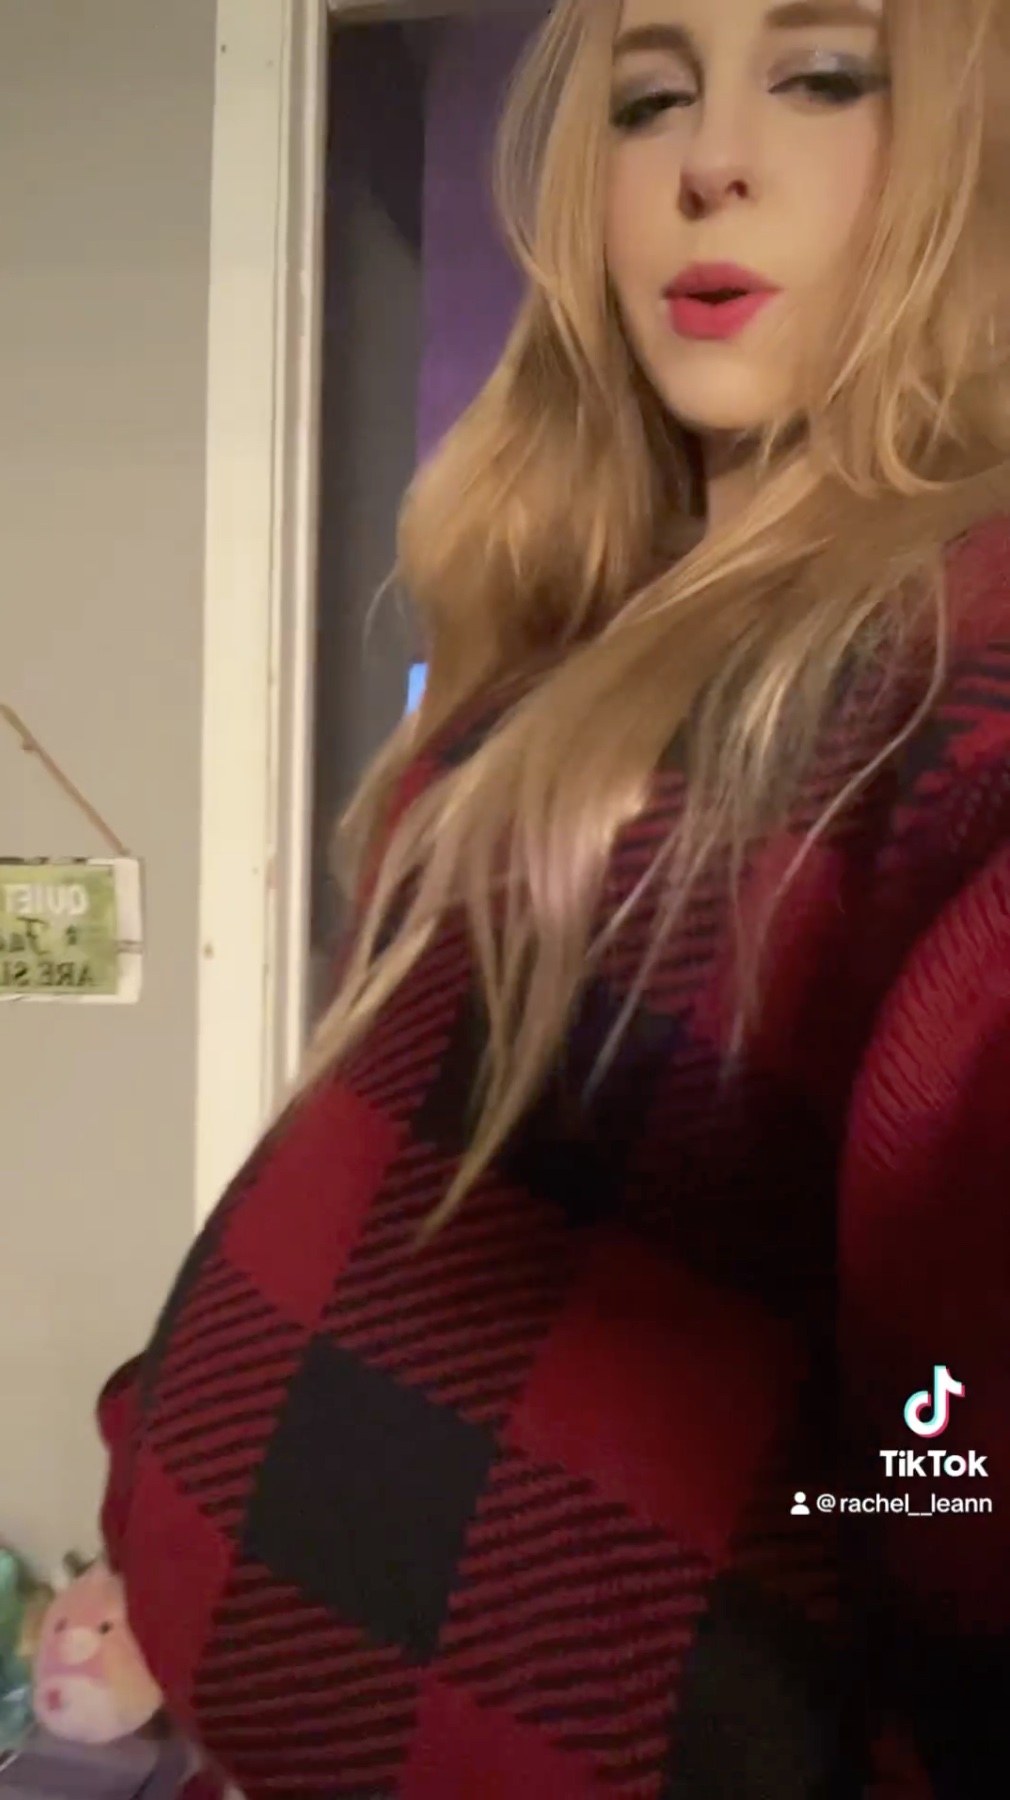 She took to TikTok to flaunt her bump of her future child she will share with her new boyfriend, Scott